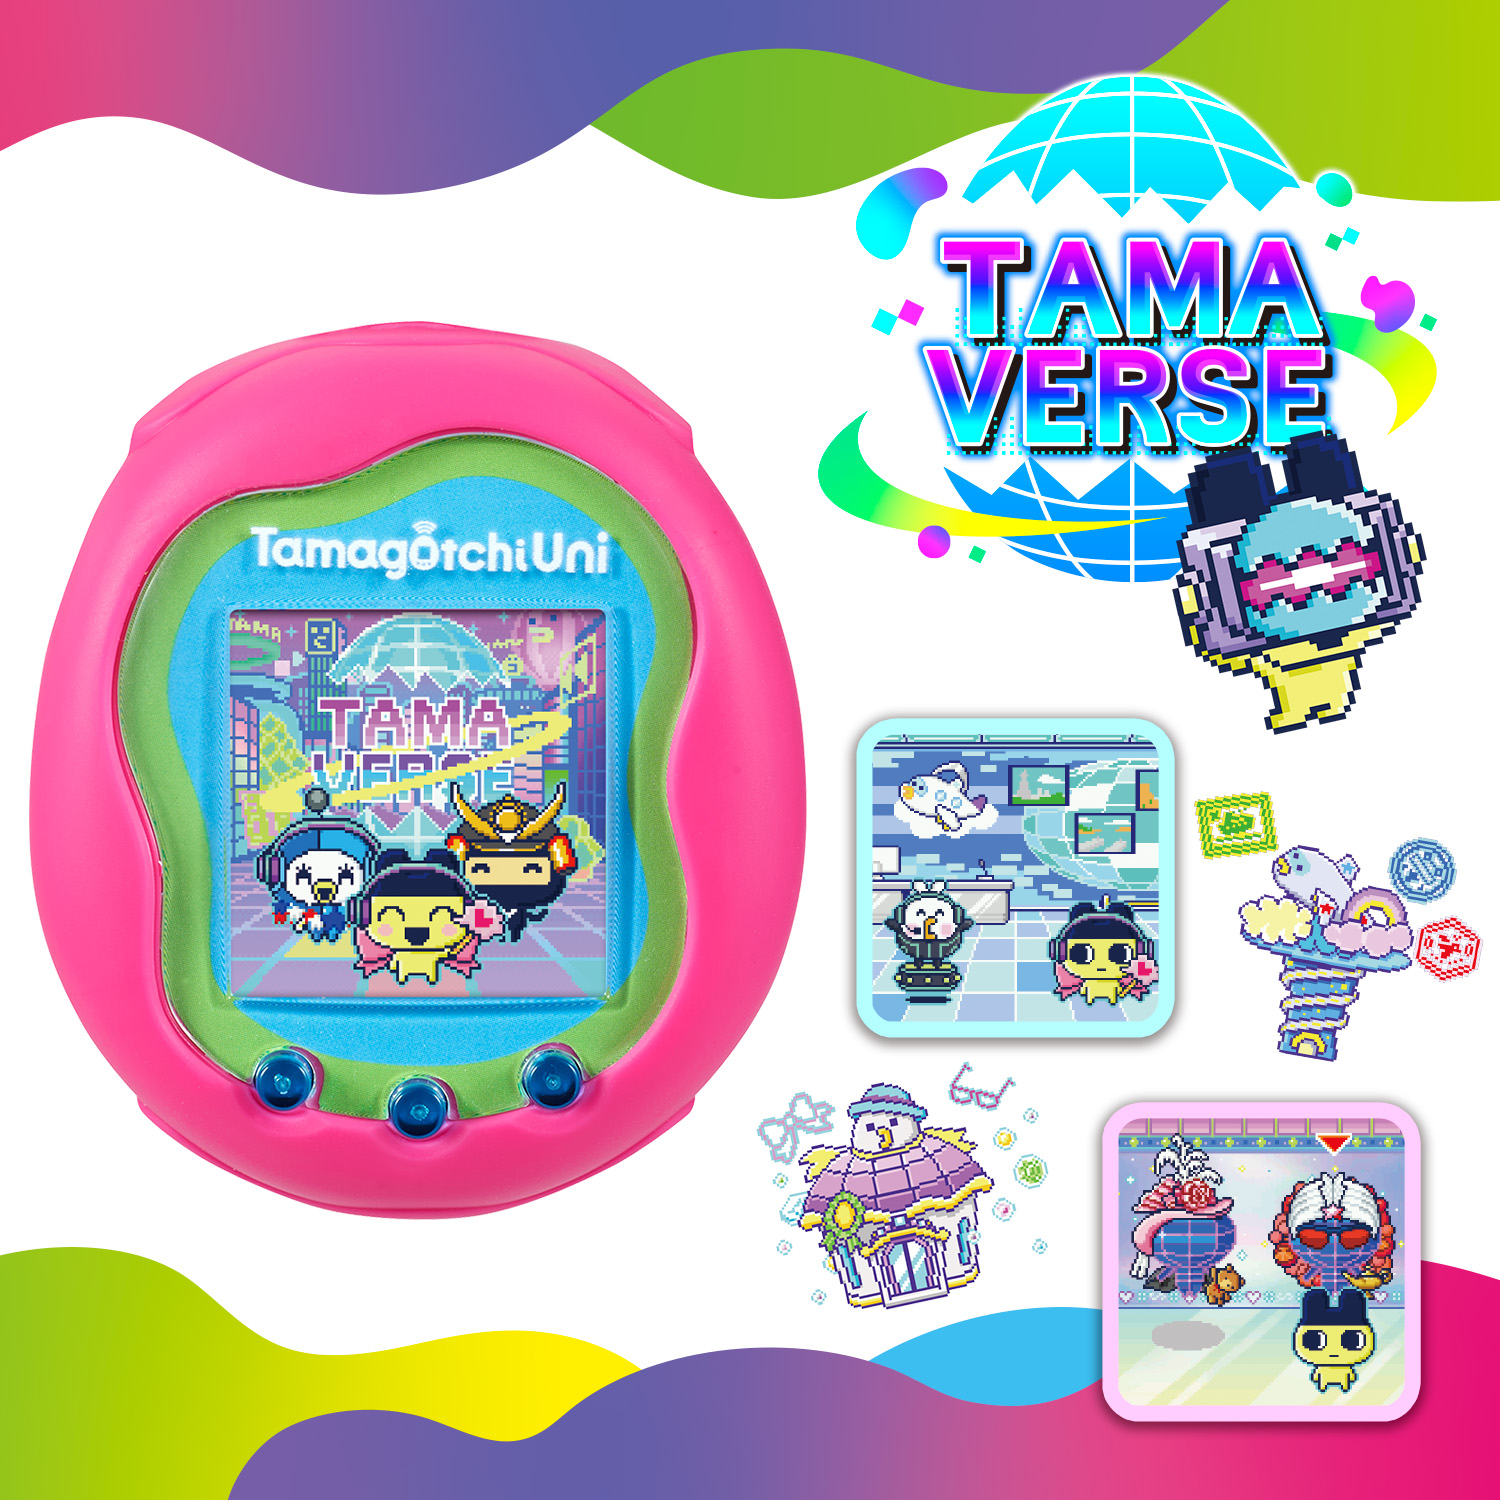 Tamagotchi Uni - Pink  PREMIUM BANDAI USA Online Store for Action Figures,  Model Kits, Toys and more